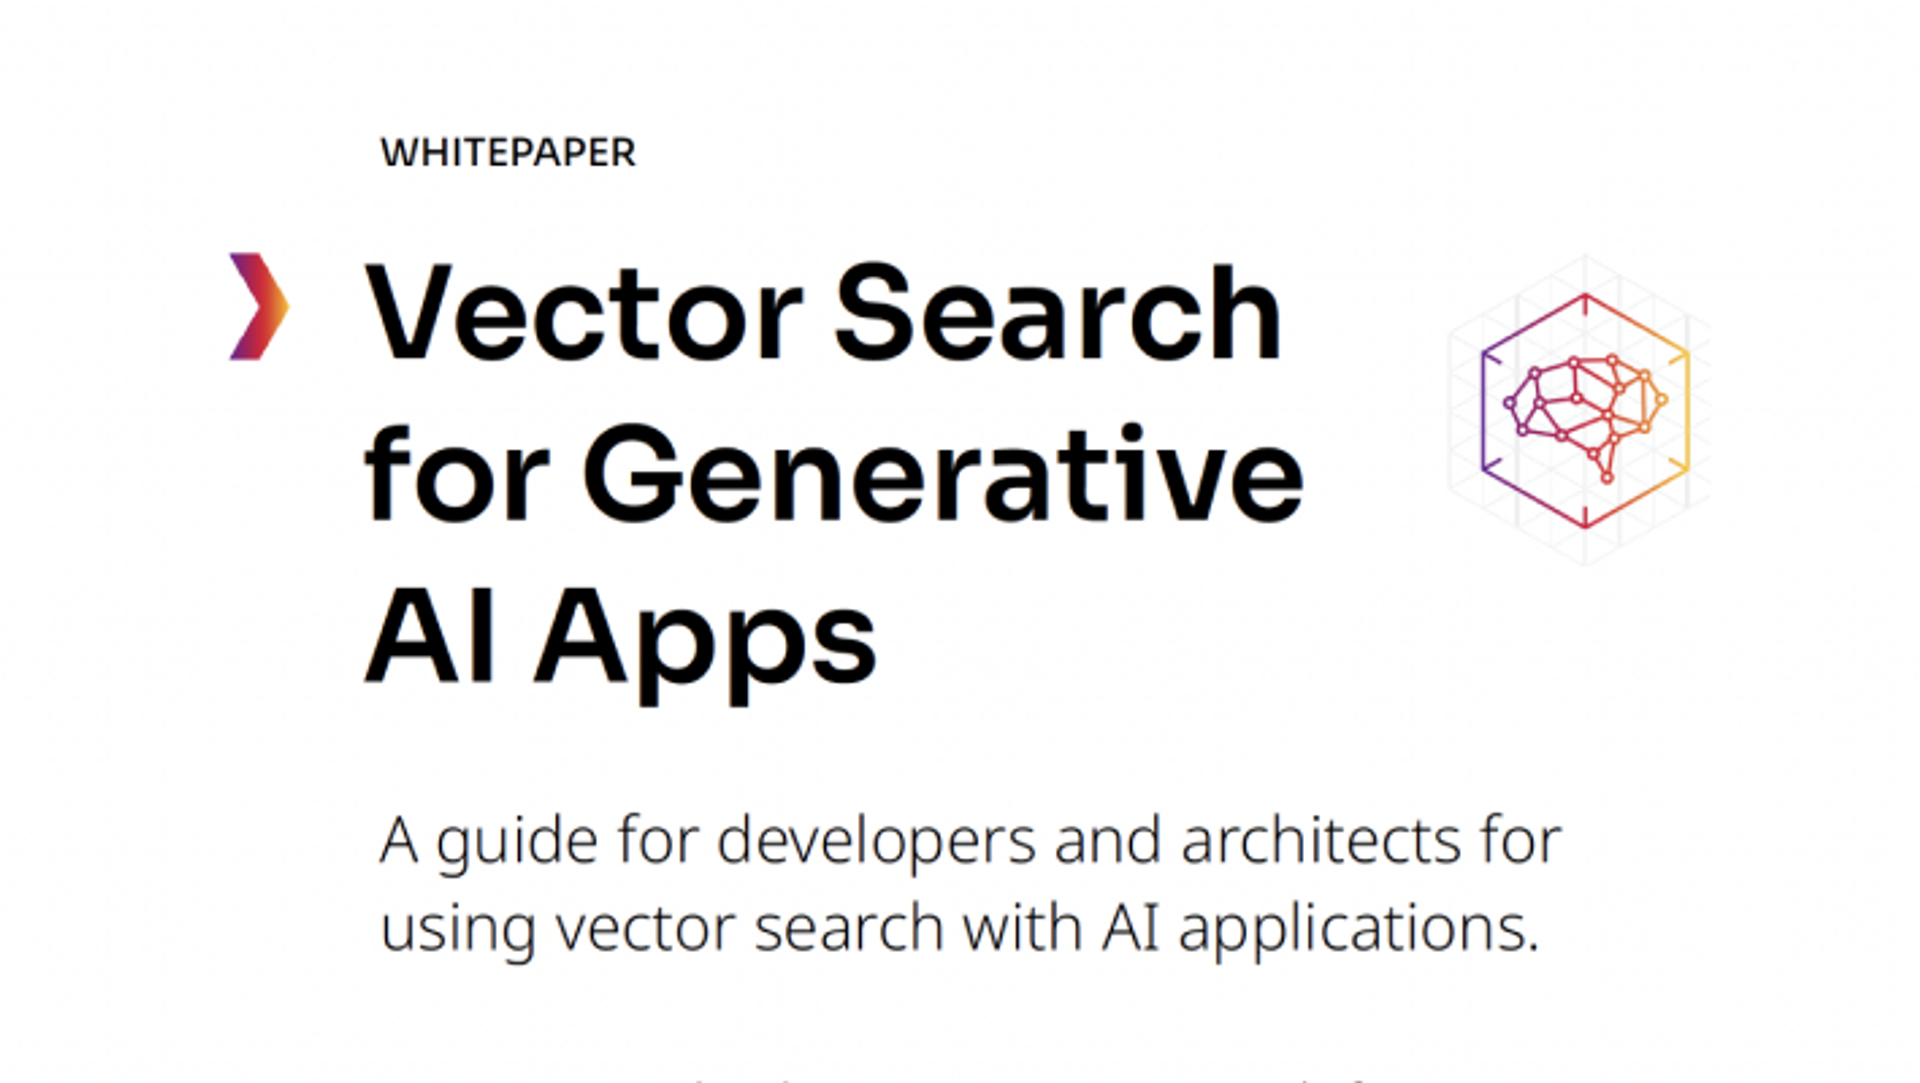 Vector Search for Generative AI Apps